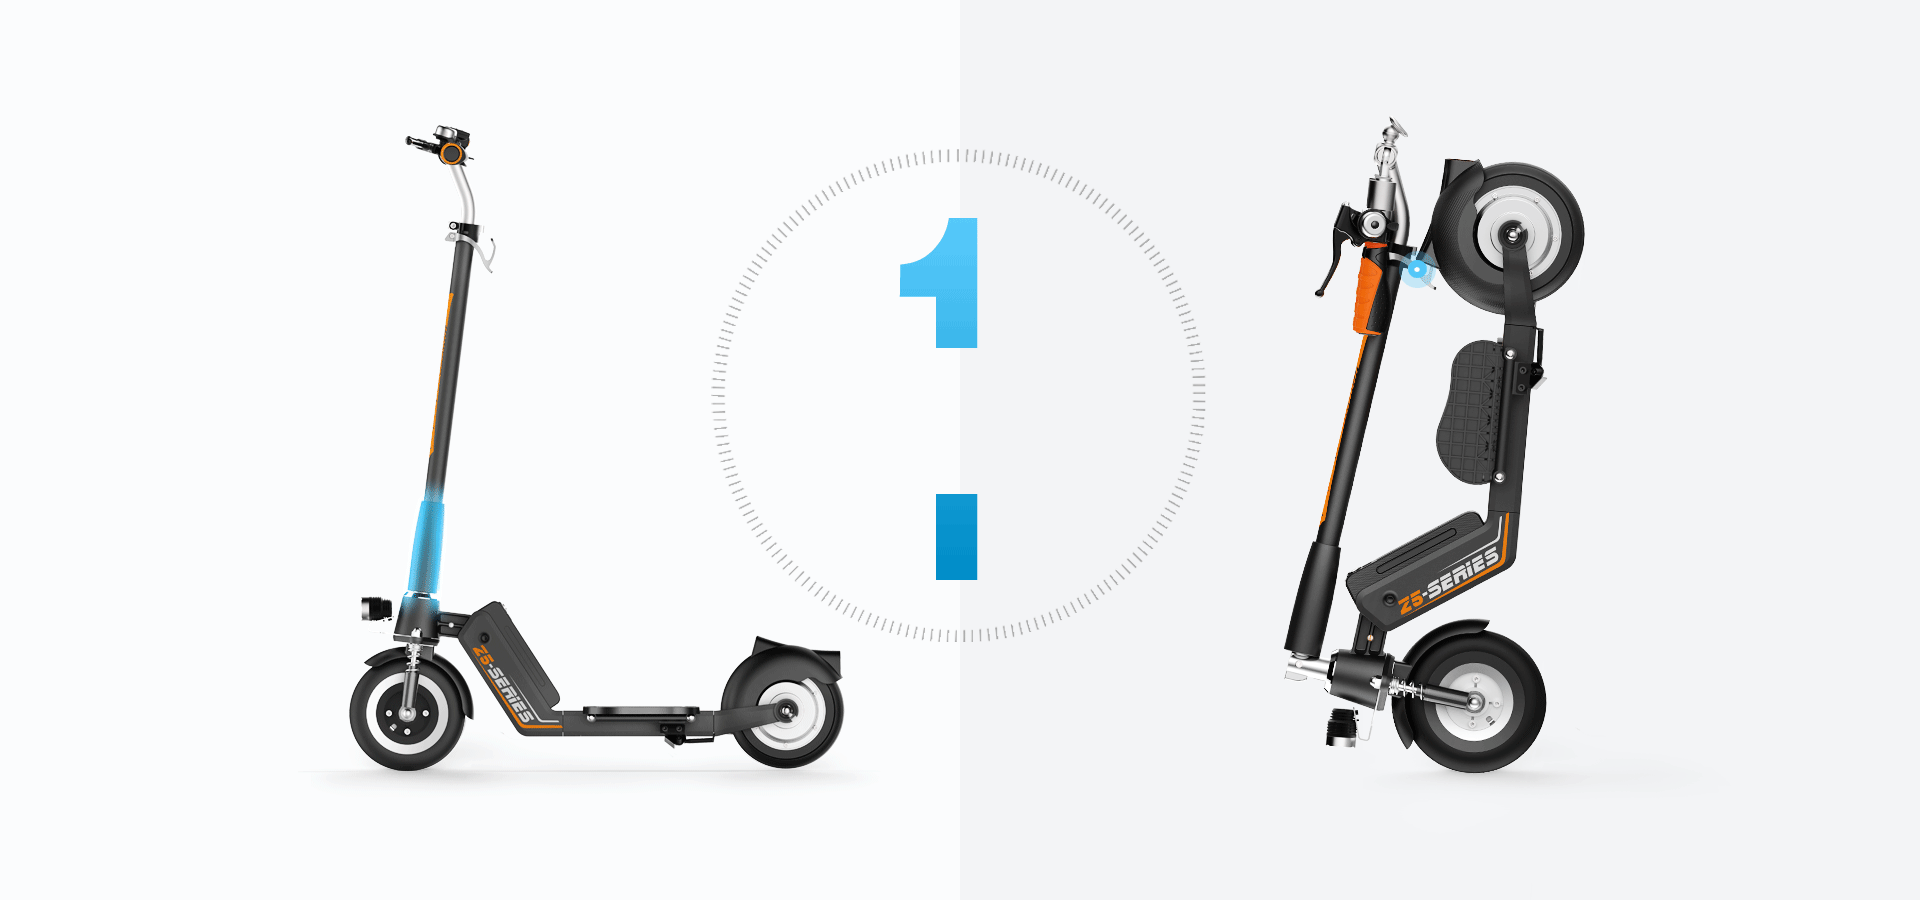 Airwheel-z5-scooter Eco-Friendly and Safe—Airwheel Smart Self Balance Electric Scooter